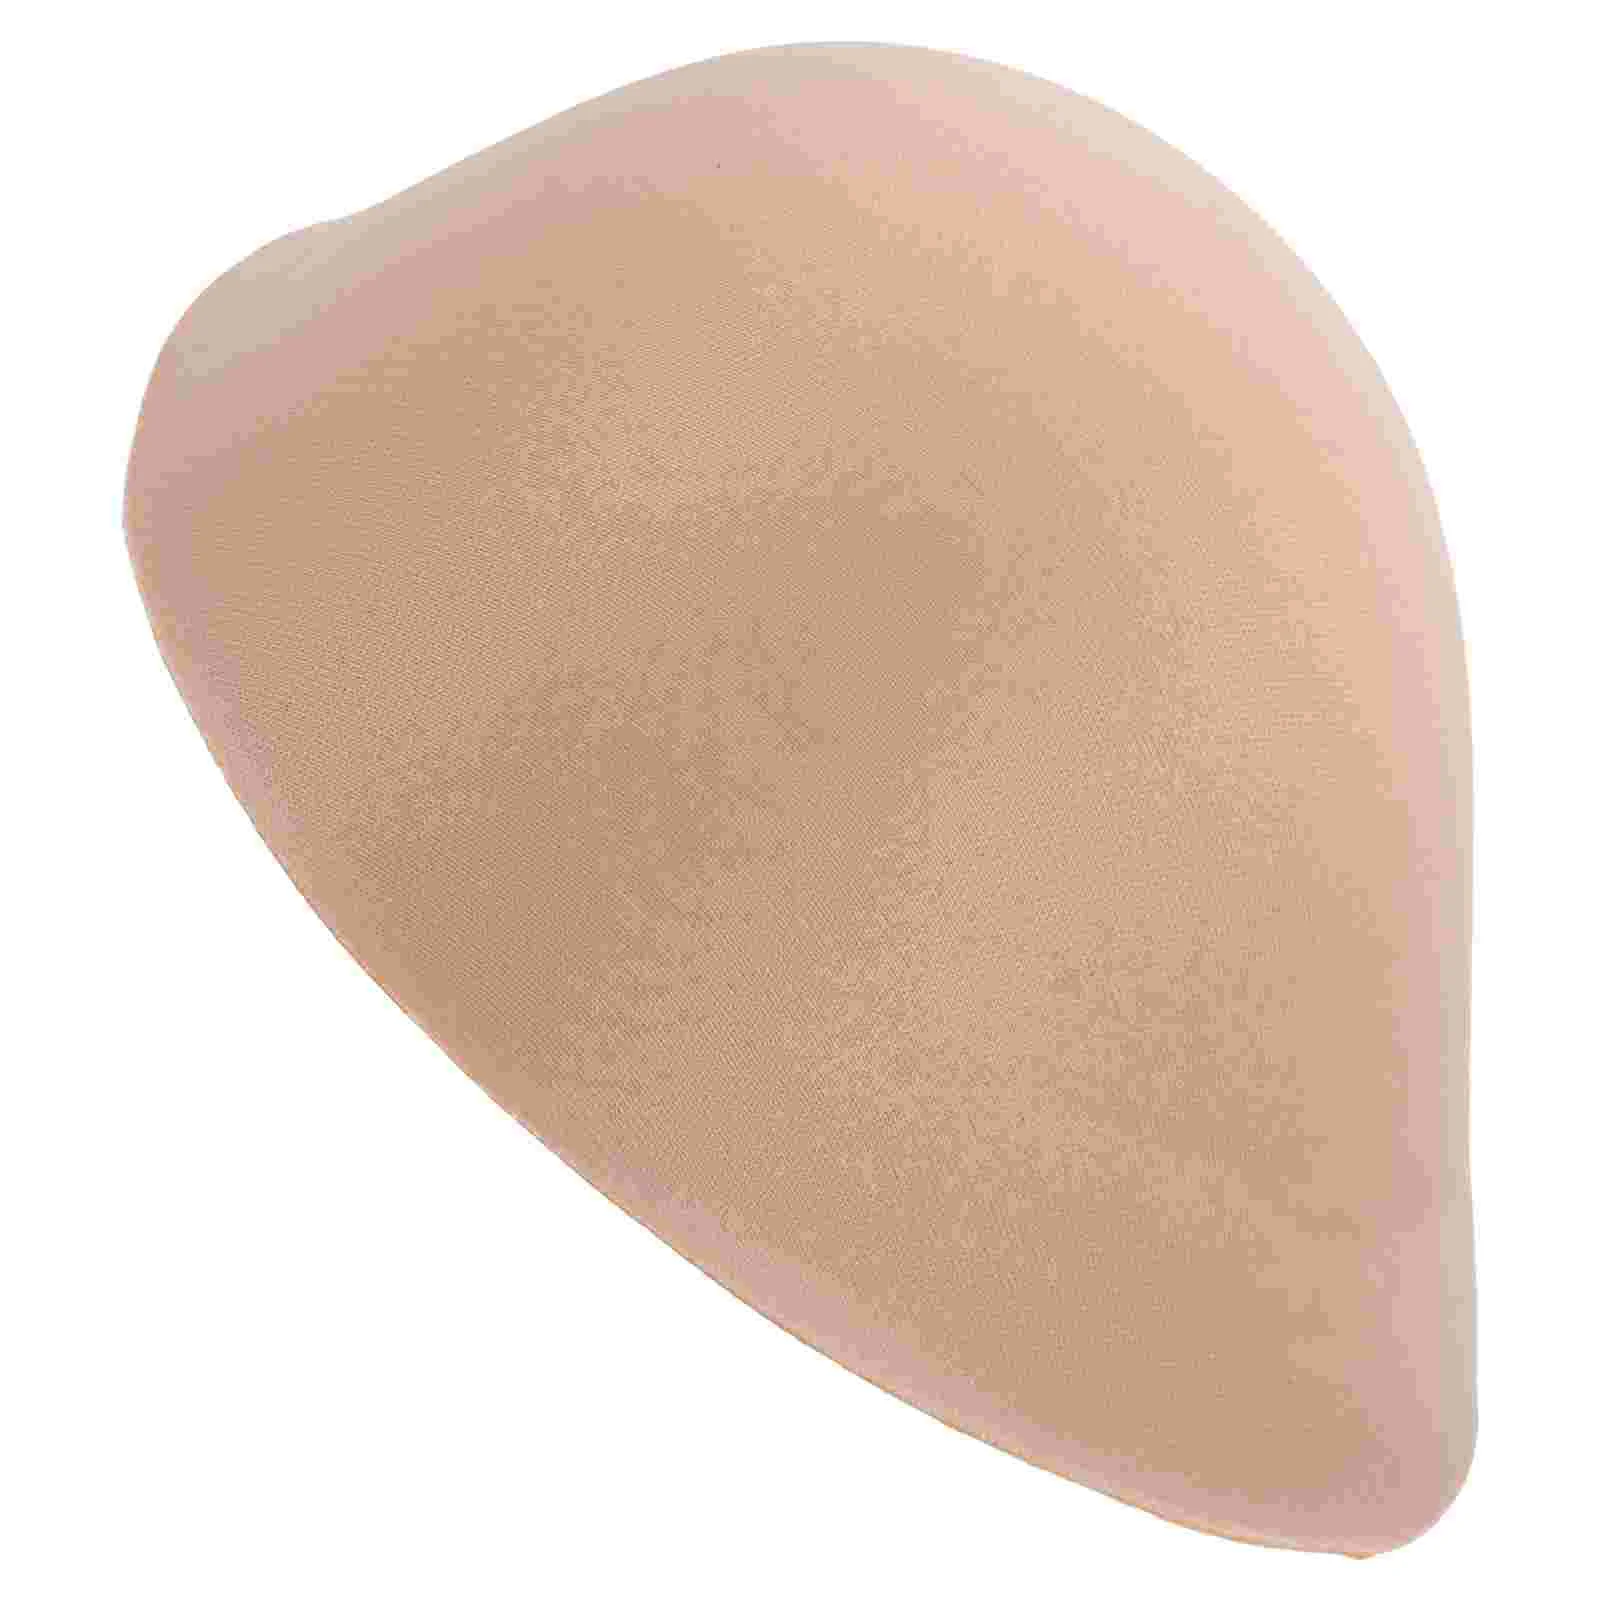 

Bras Triangular Sponge Prosthetic Breast Padding Girl Replacement Breathable Inserts Pads Women Miss